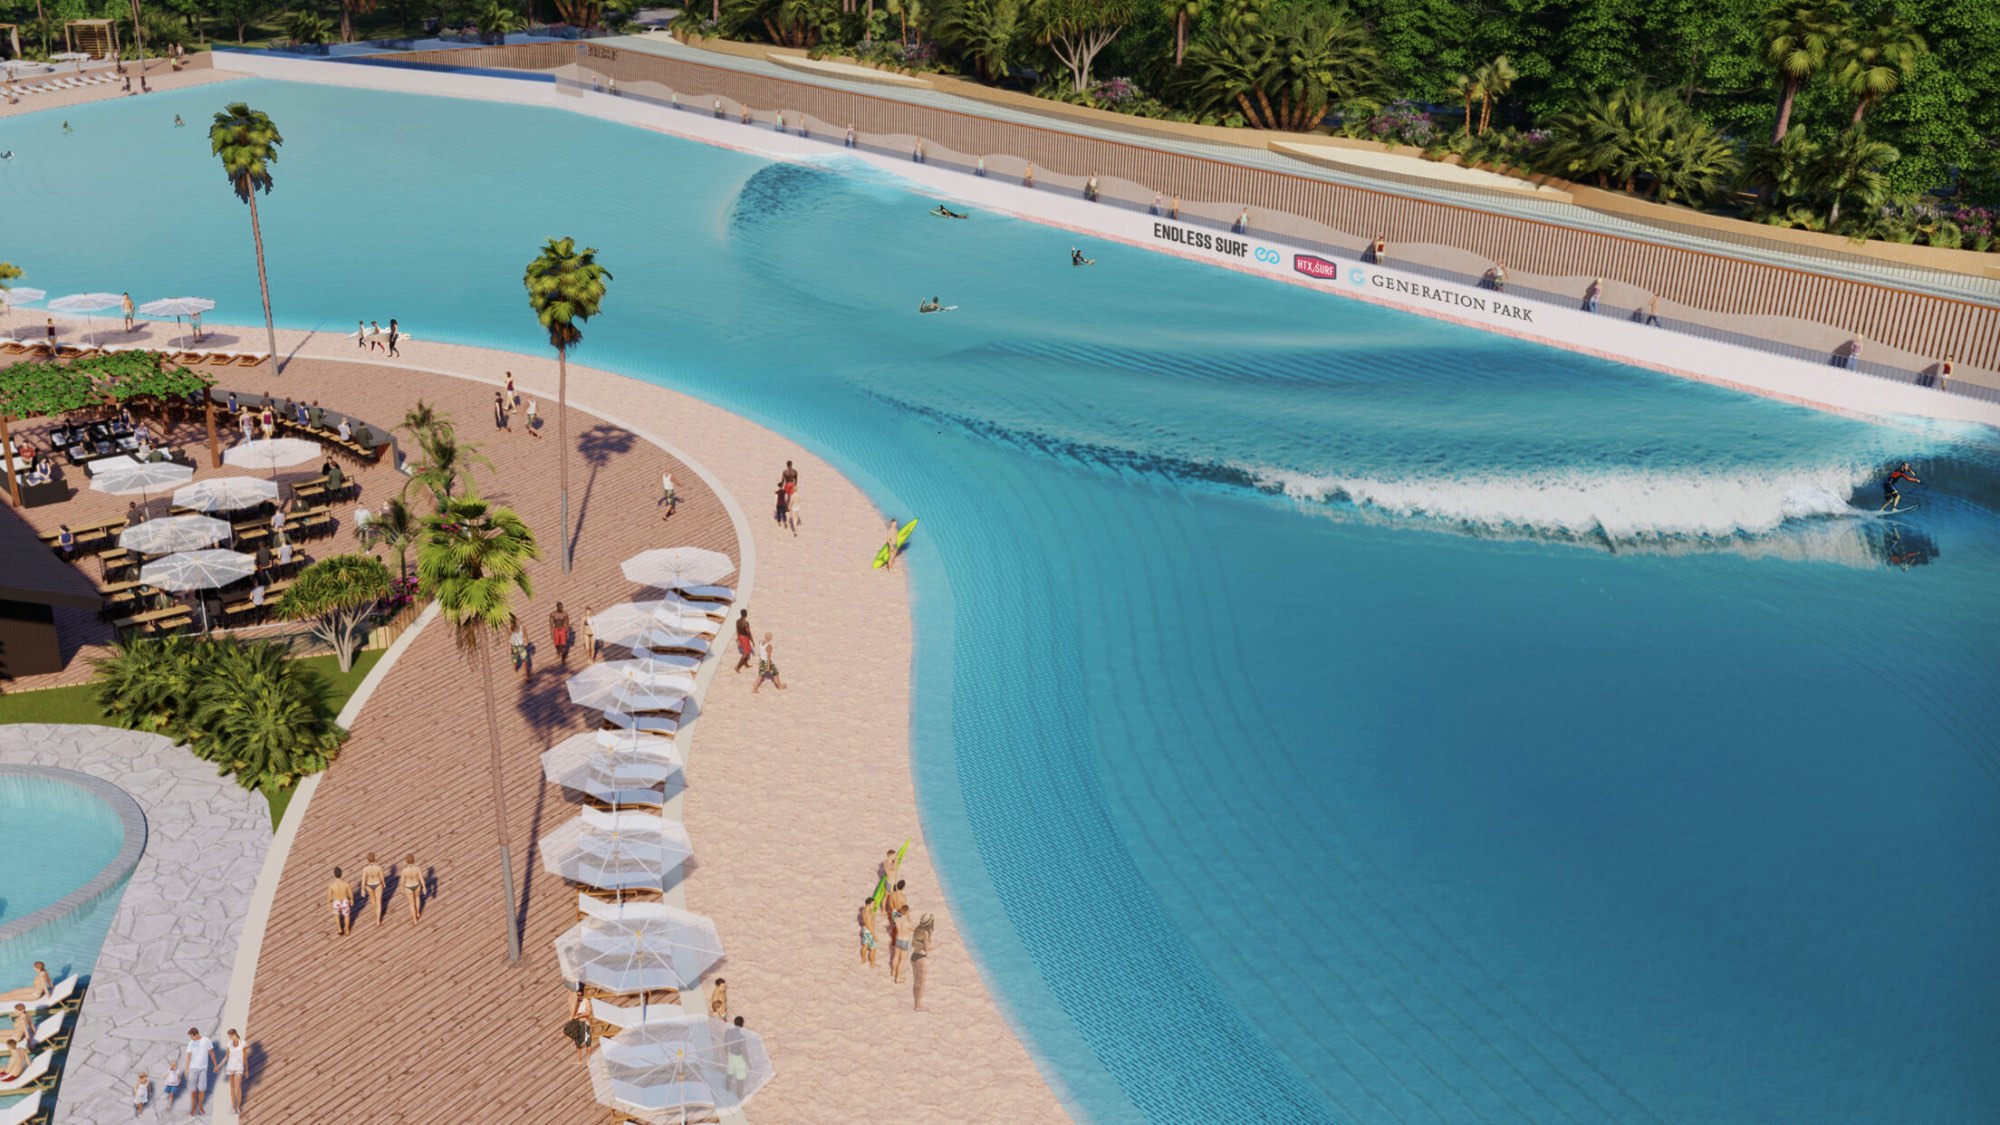 Planned Endless Surf wave pool in houston